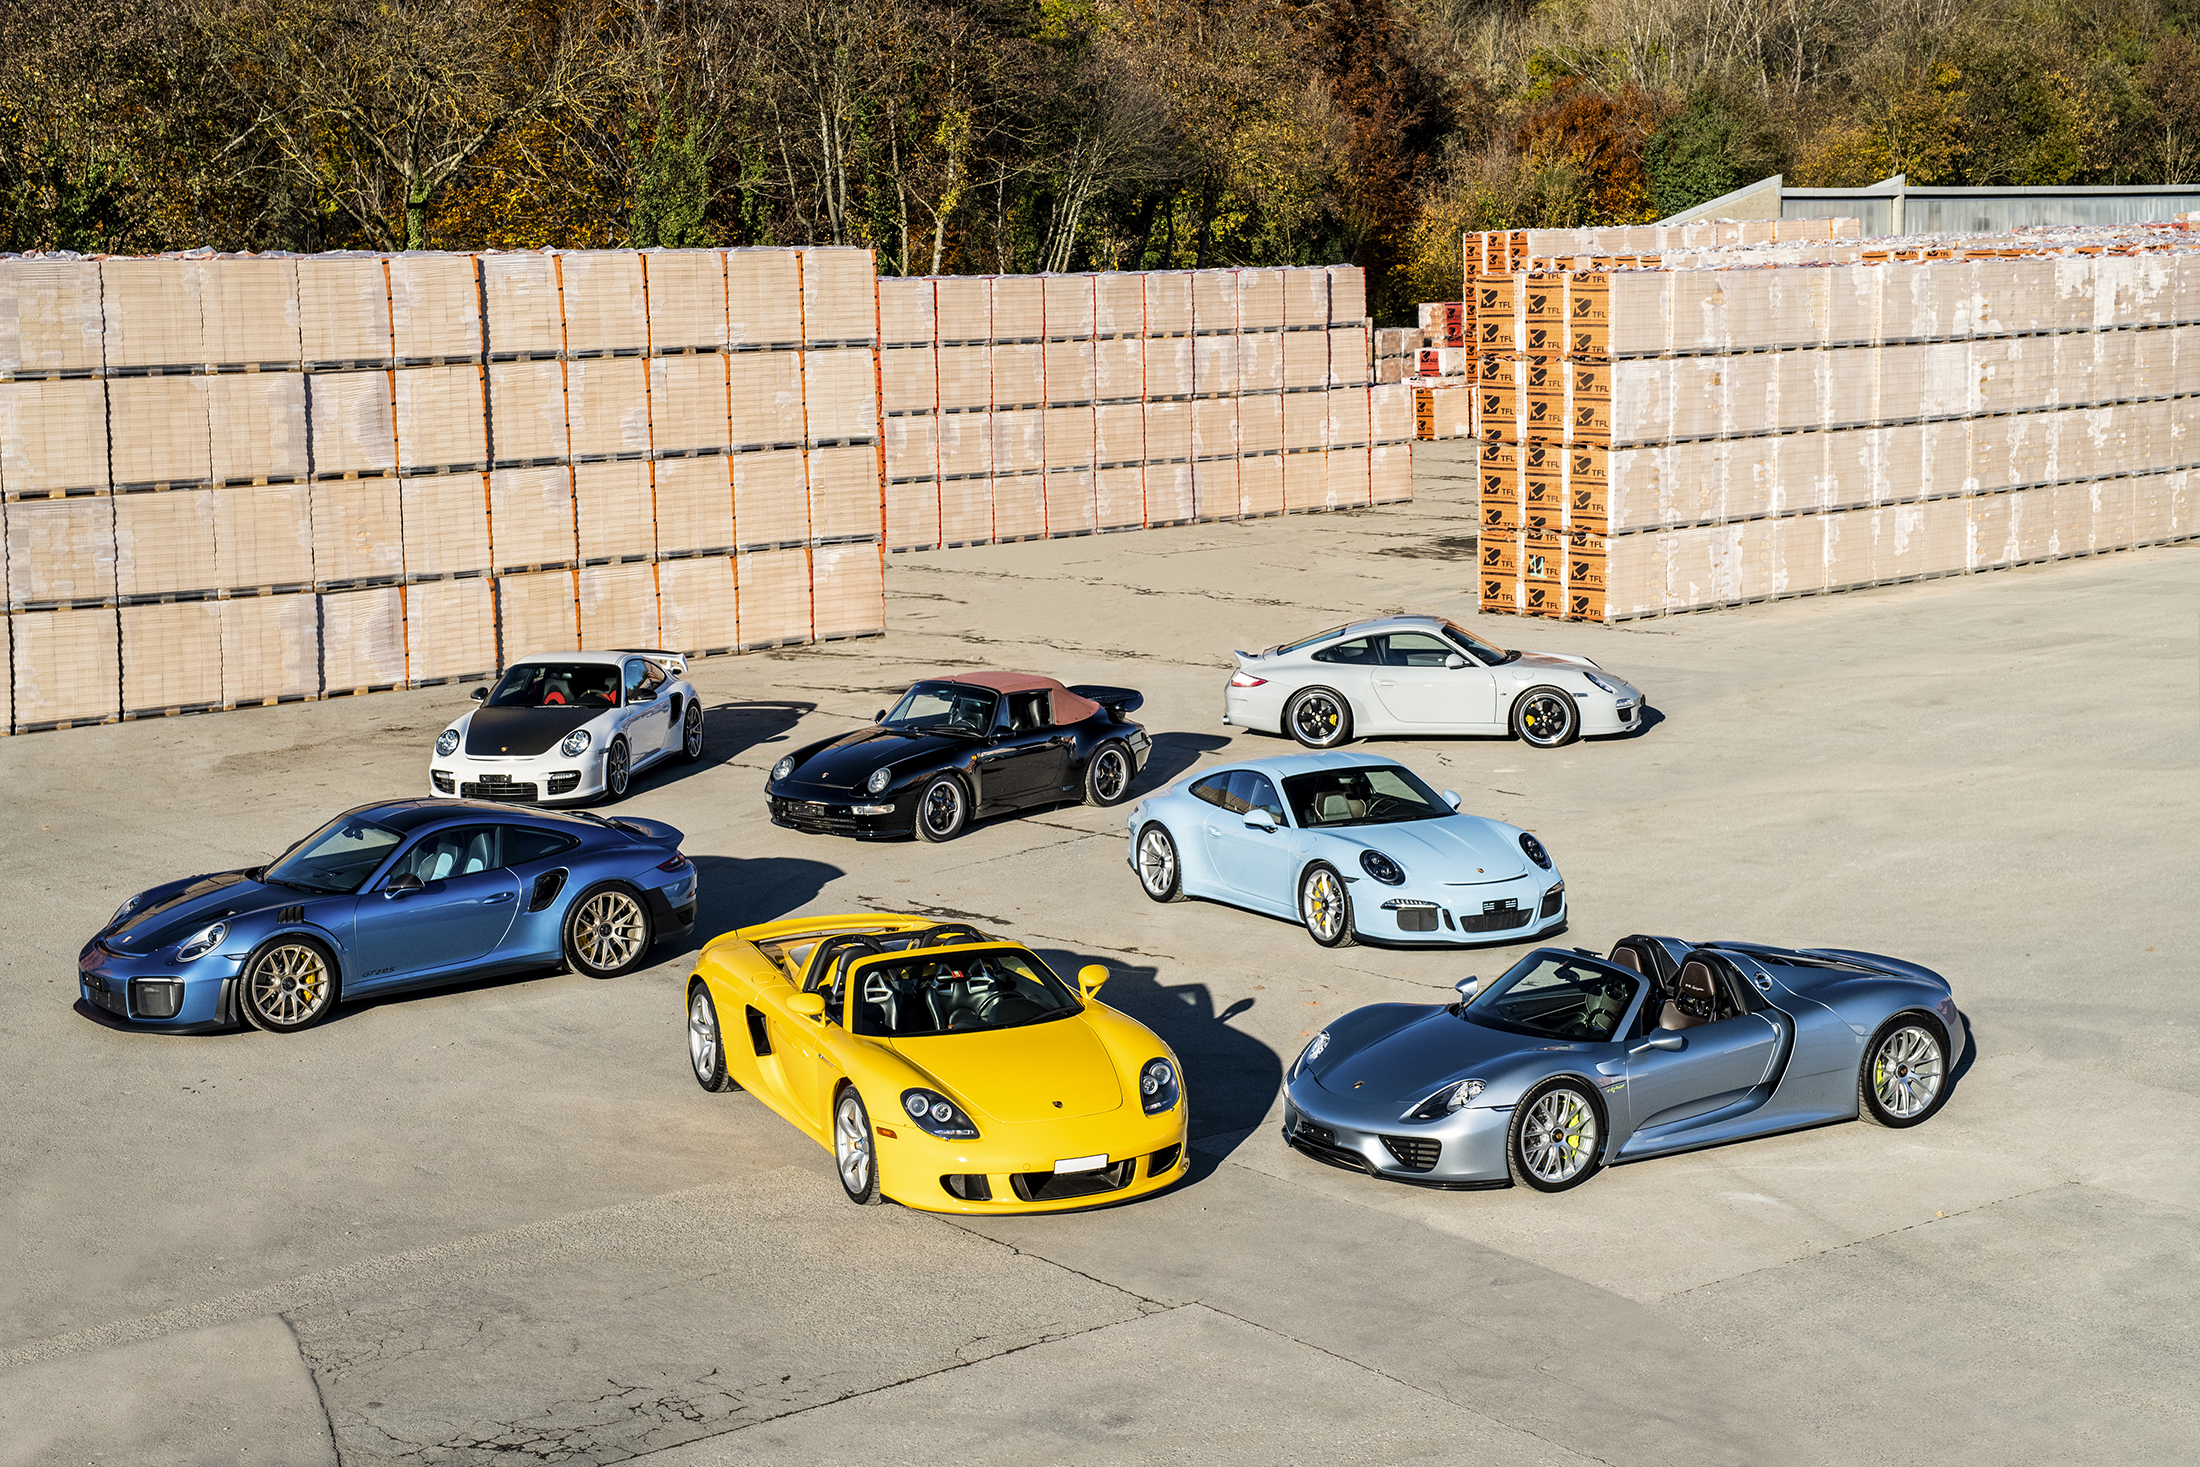 210219 The Swiss Porsche Collection (Credit - Remi Dargegen ©2020 Courtesy of RM Sotheby's)